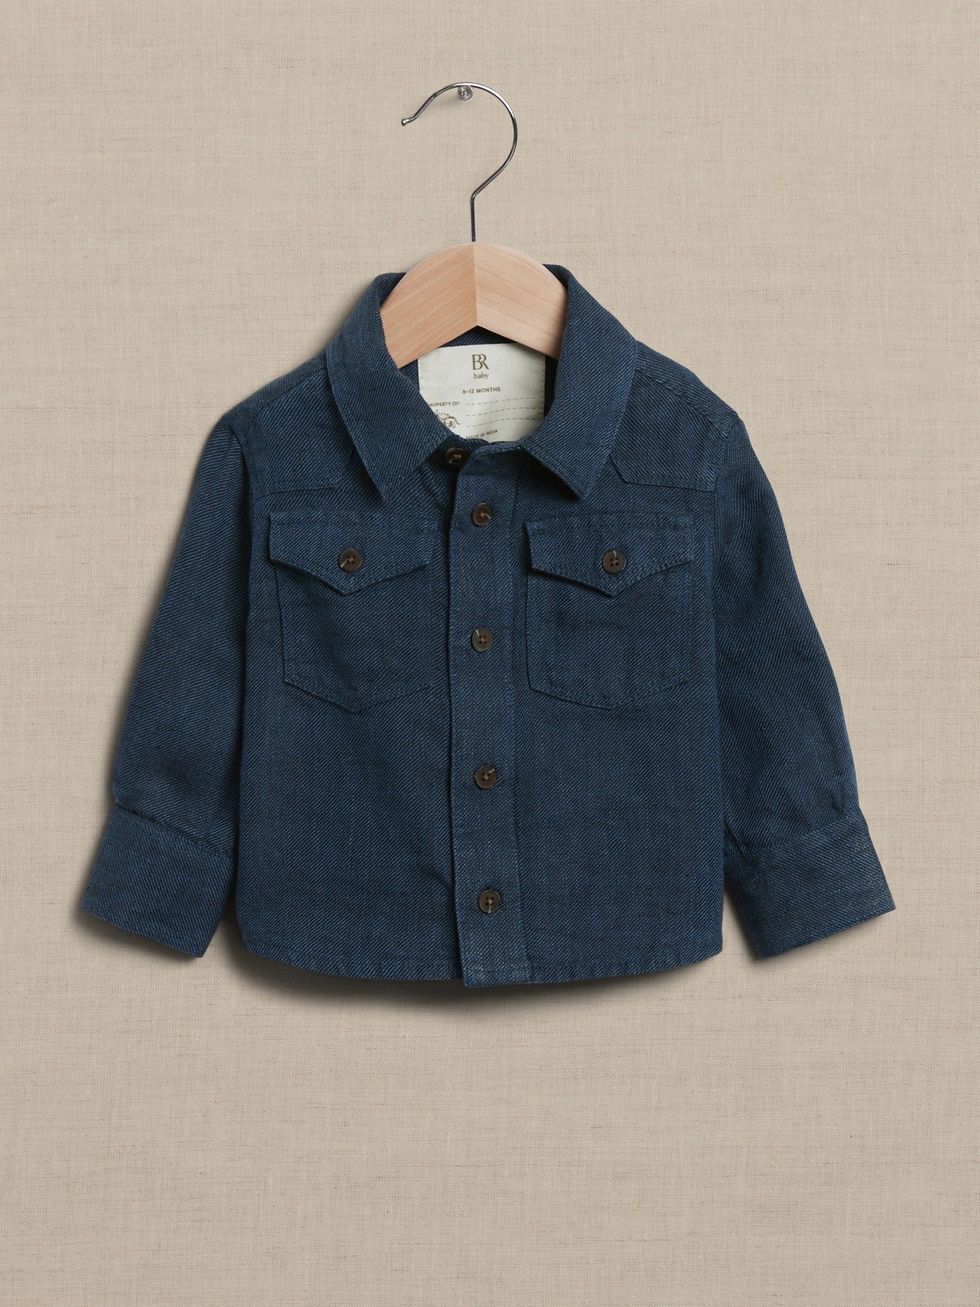 Banana Republic The Western Shirt for Baby & Toddler